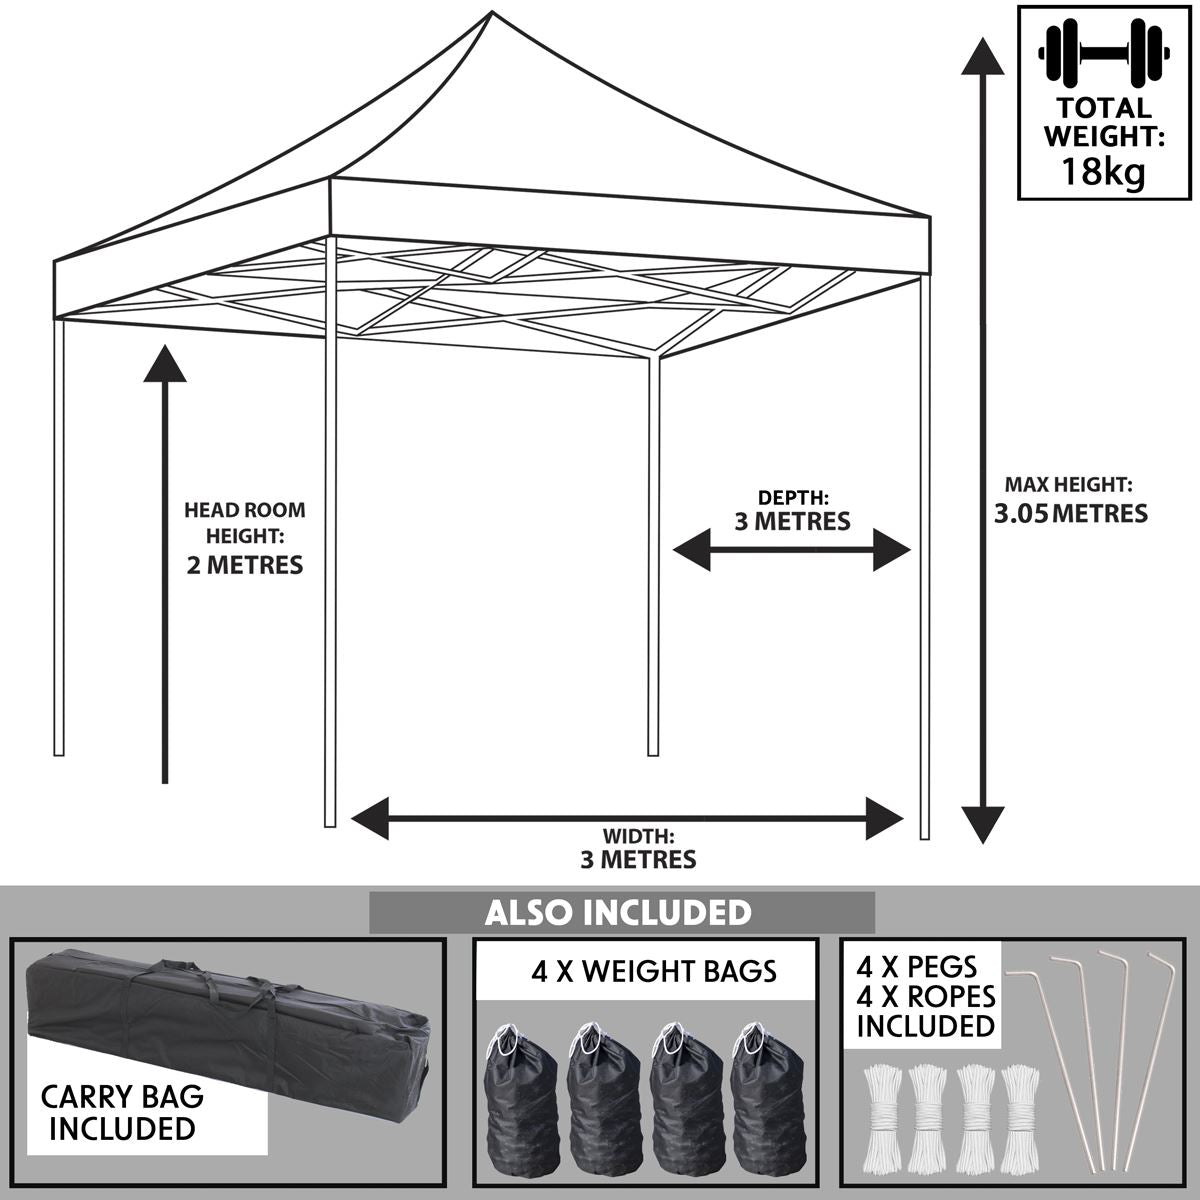 Dellonda Premium 3 x 3m Pop-Up Gazebo, PVC Coated, Water Resistant Fabric, Supplied with Carry Bag, Rope, Stakes & Weight Bags - Grey Canopy